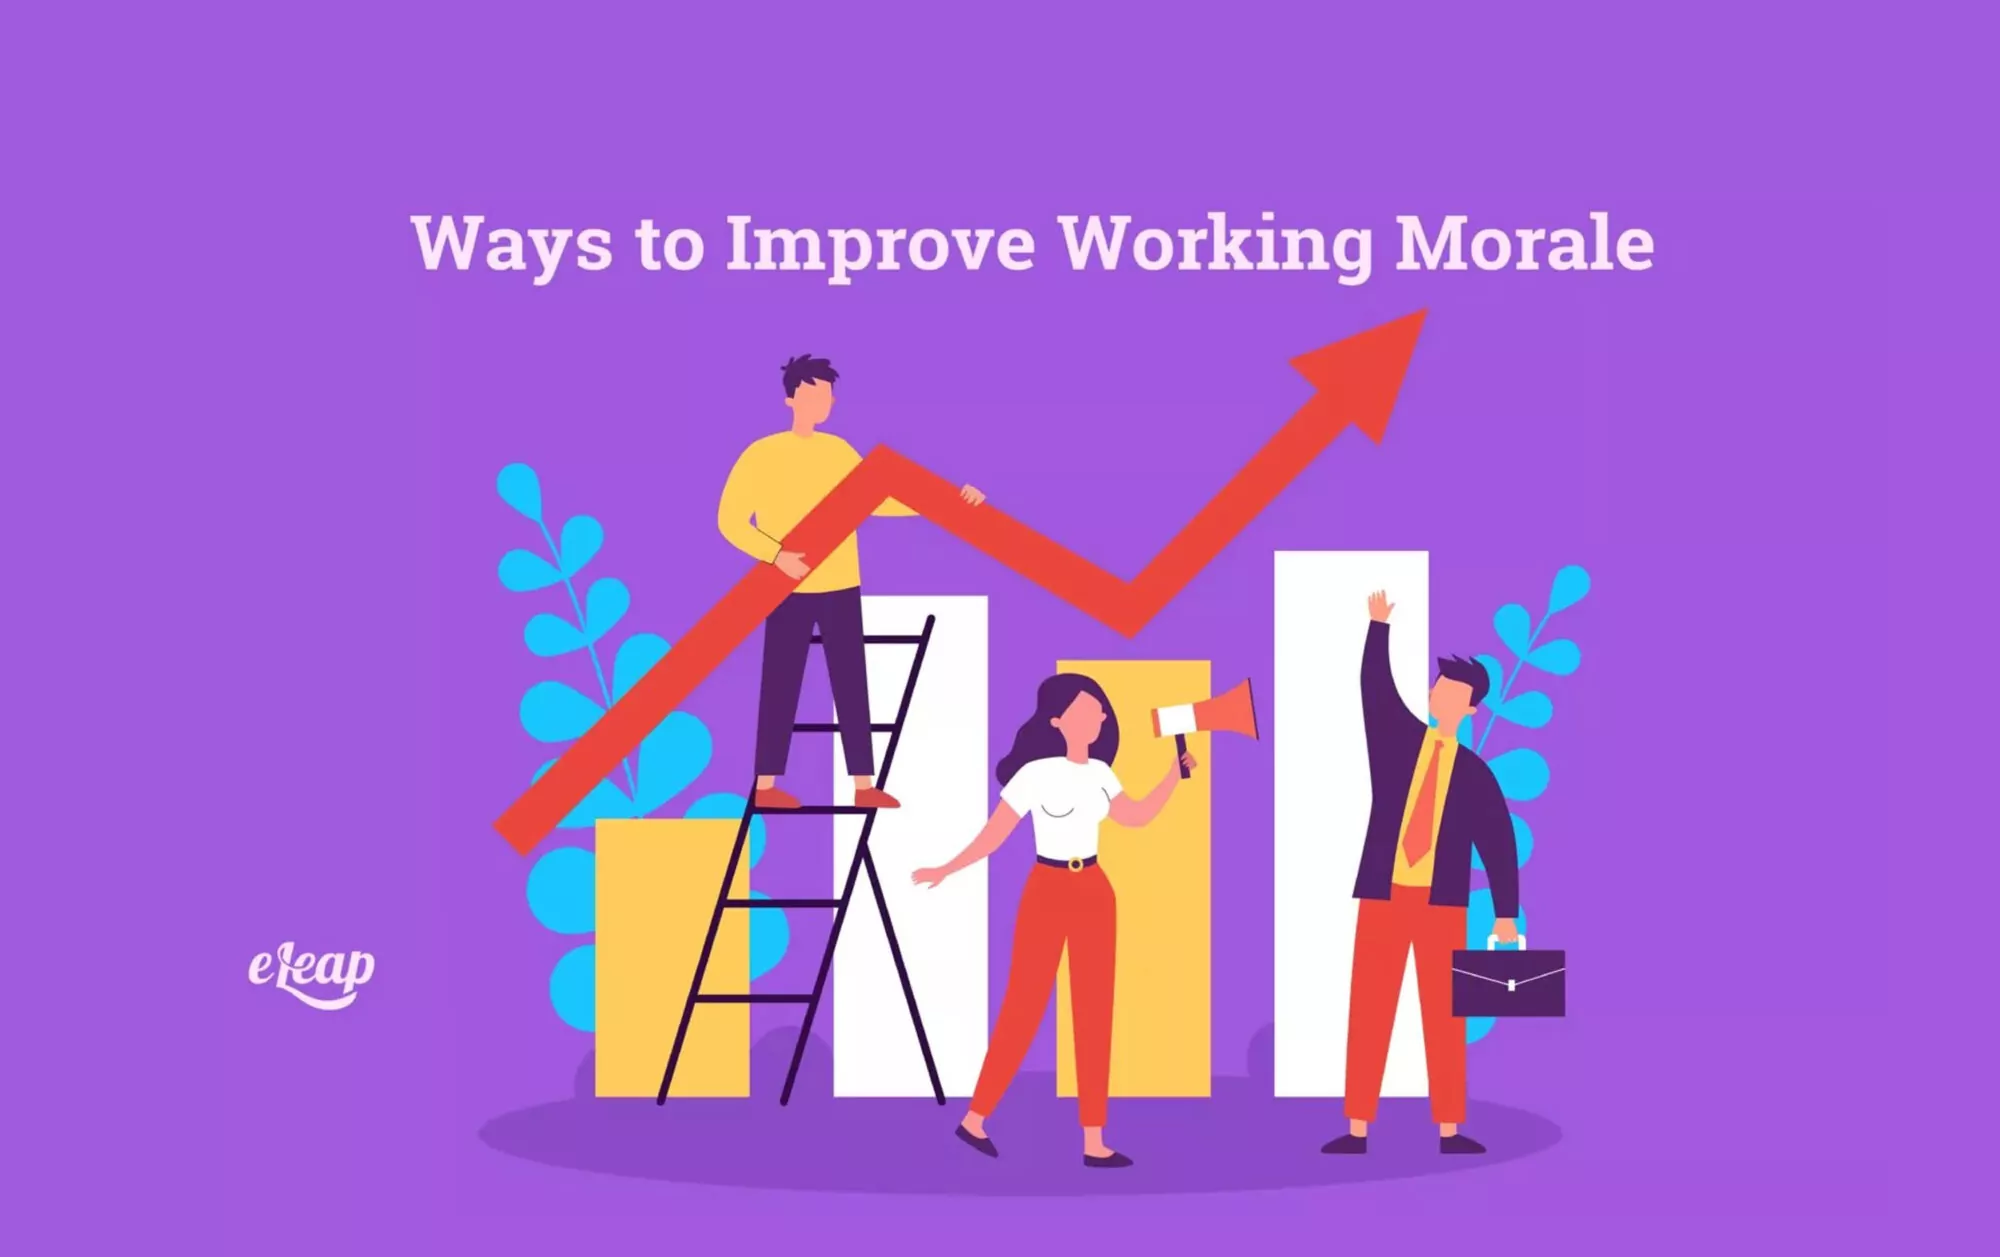 Improve Working Morale